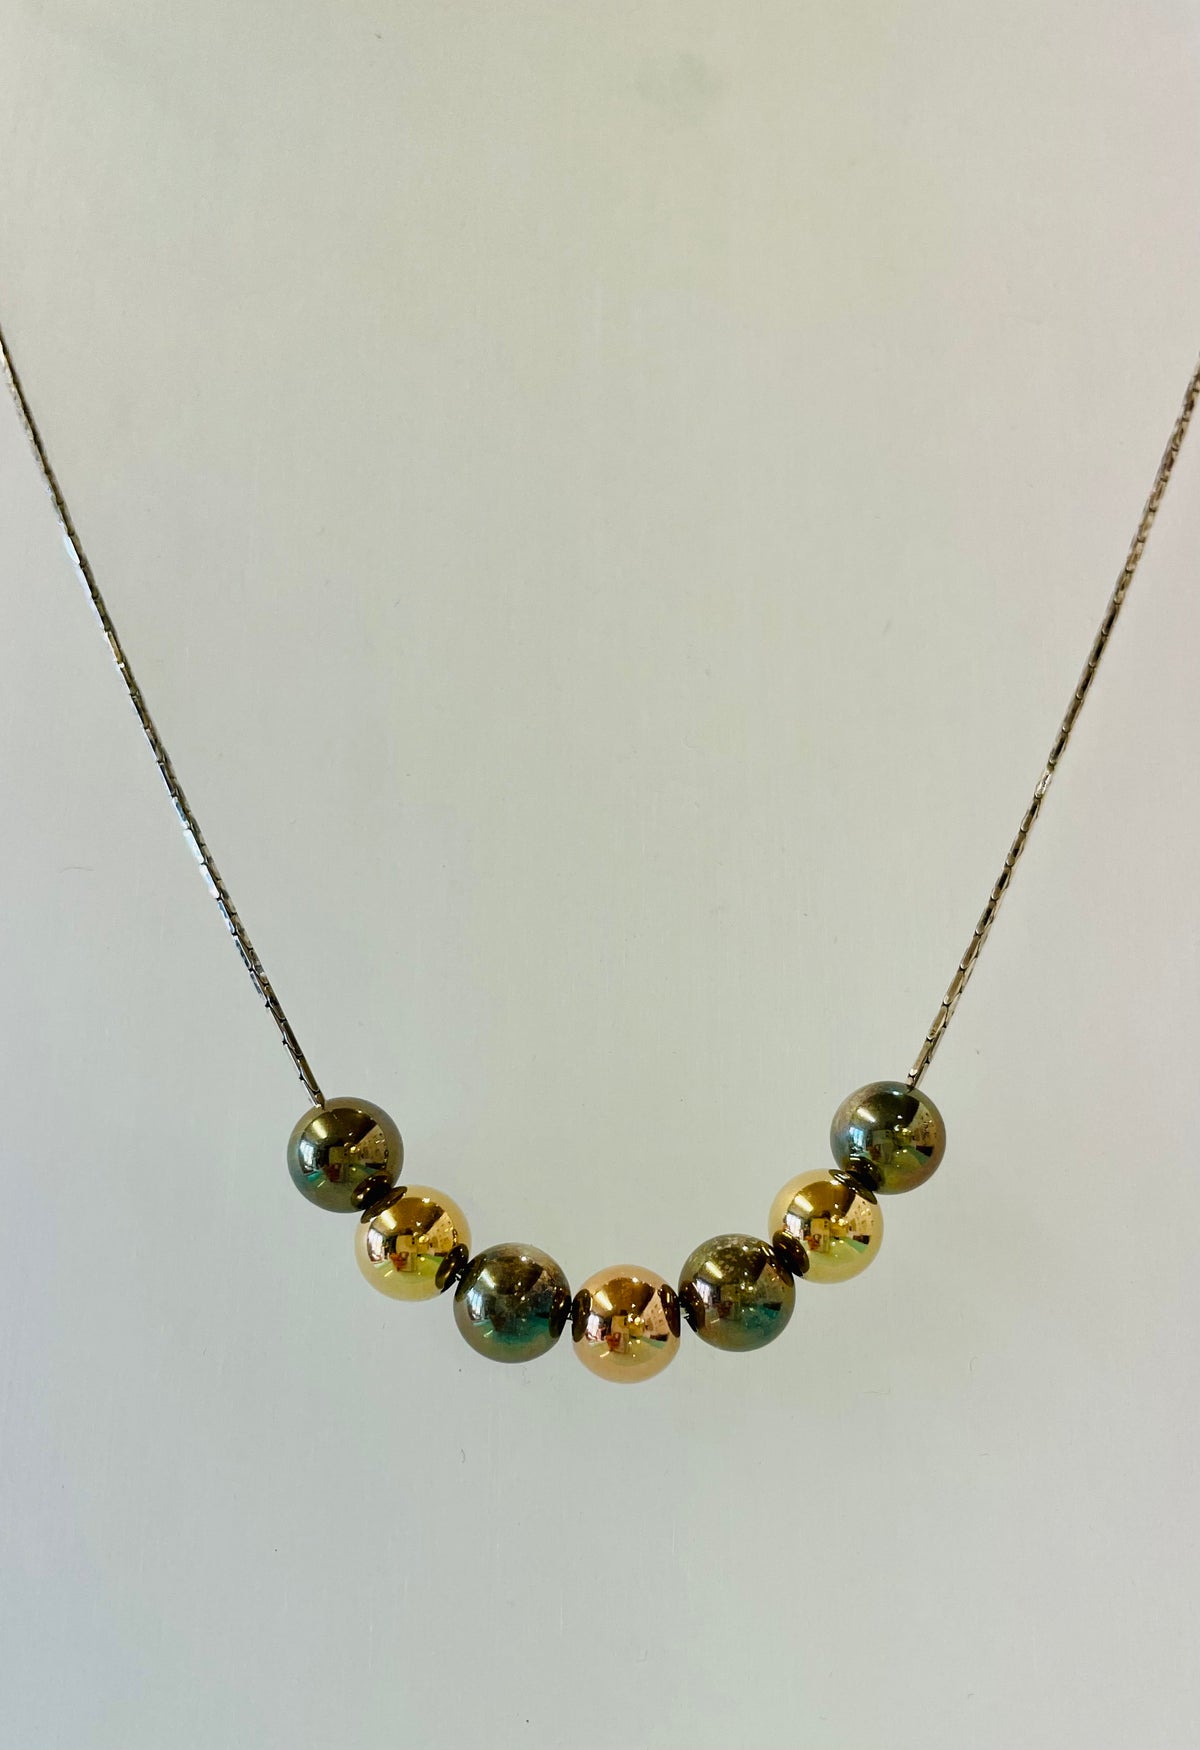 Gold and black beaded necklace by Lavan